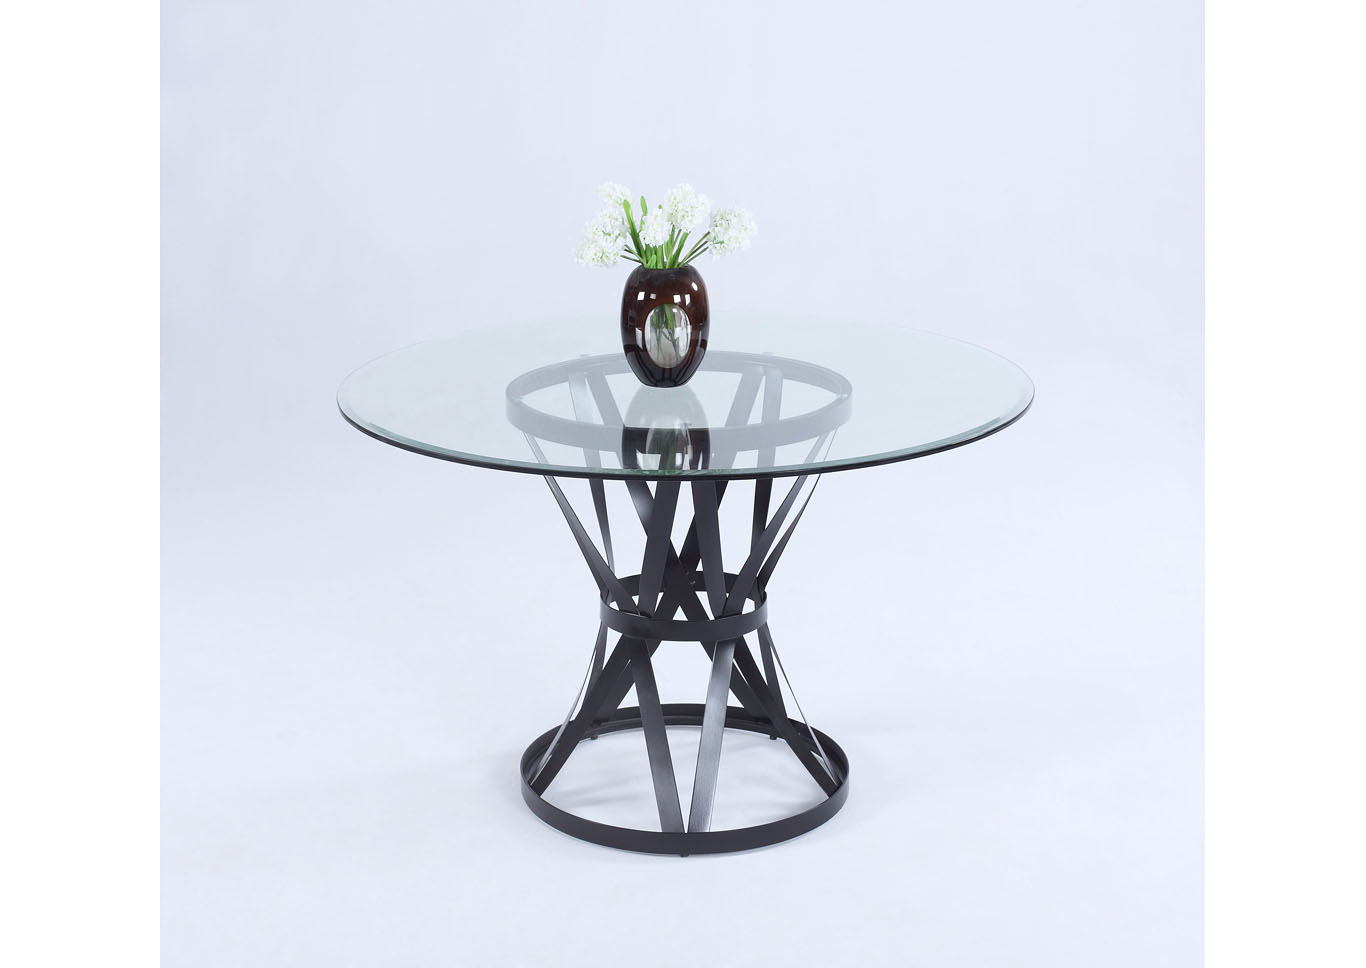 Pandora Black Round Glass Top Dining Table,Chintaly Imports